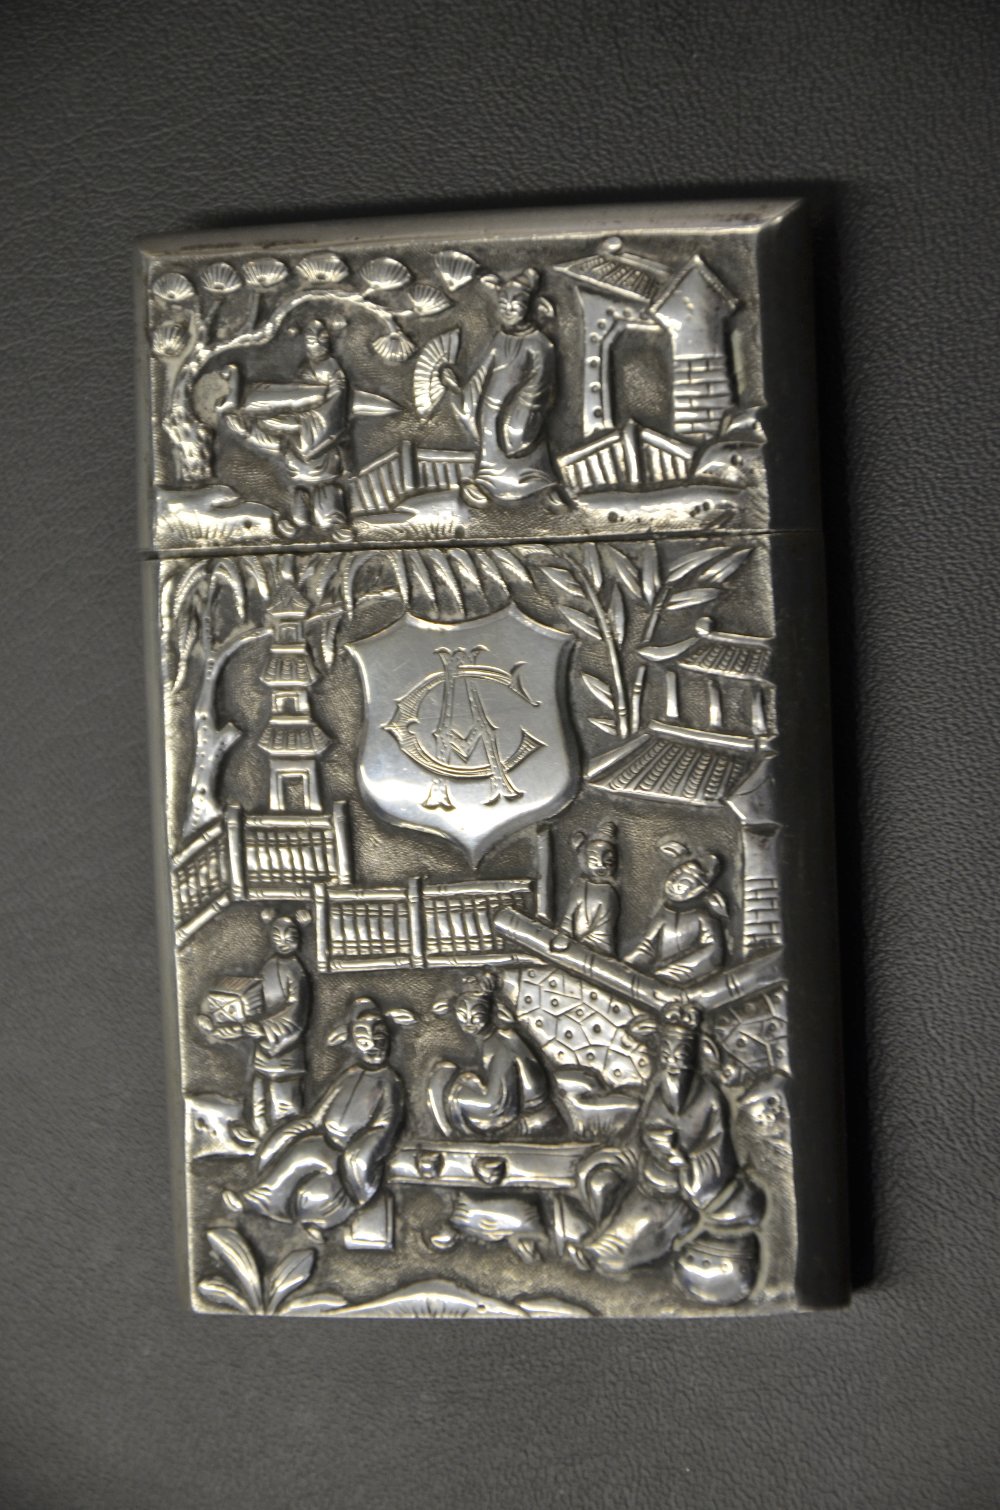 Late 19th/ early 20th century Chinese silver card case with a slip cover, embossed scenes of figures - Image 4 of 6